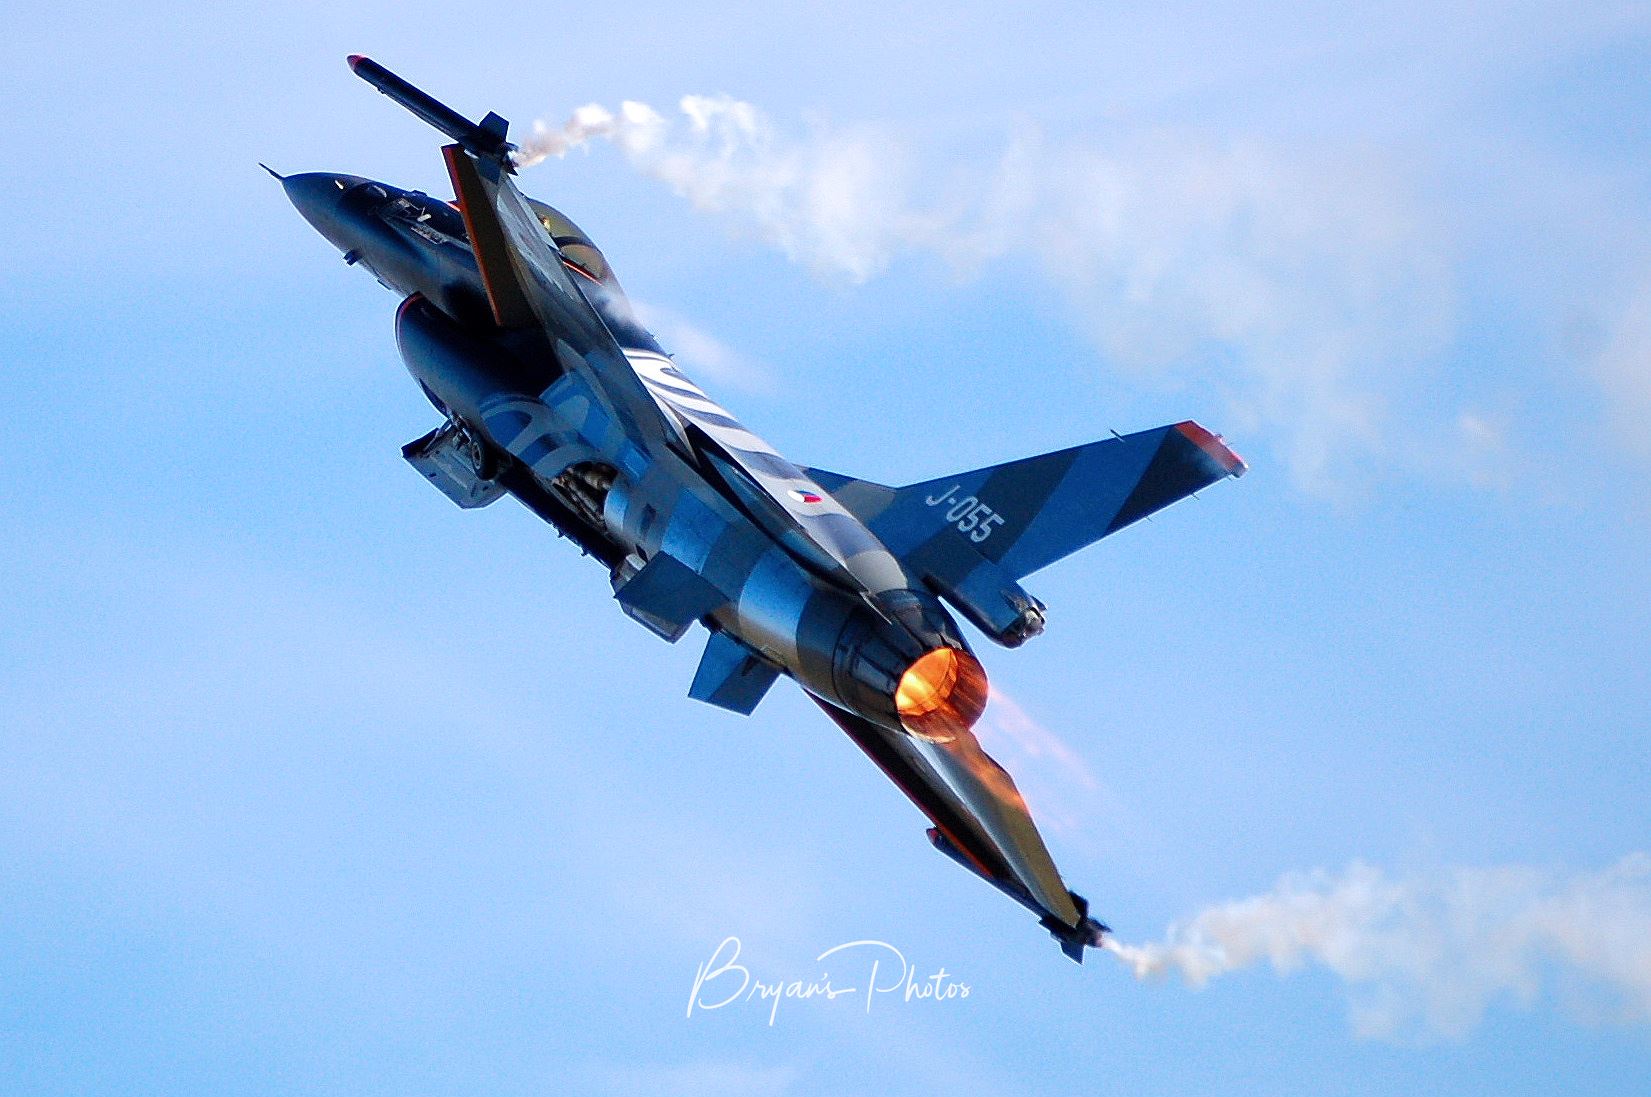 f16 Photo of a dutch F16 displaying at air show by Bryans Photos